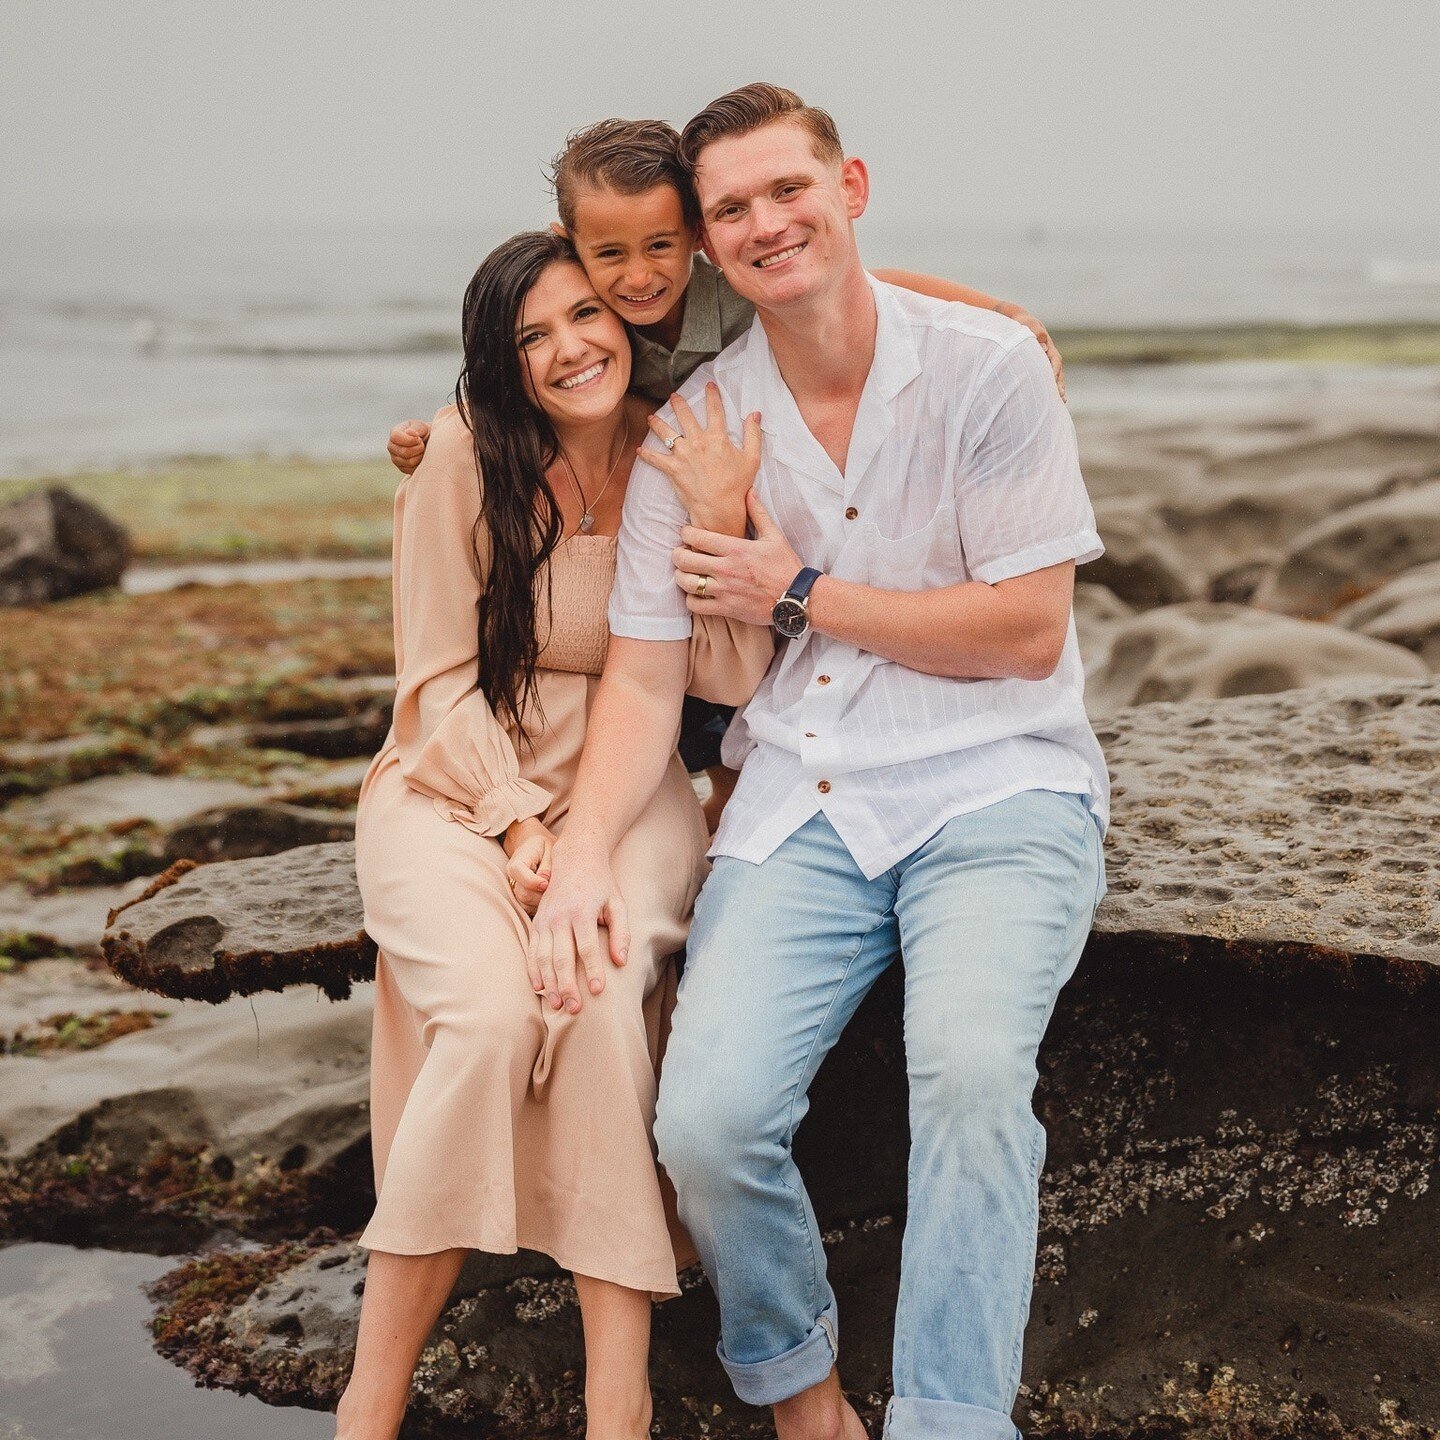 Caught in the rain with Miranda + Jake during their engagement shoot at La Jolla Tidepools. ☔️ Featuring their awesome son and embracing the unexpected with an OhPg shoot in the rain. Real moments, real fun. Here's to love that weathers any storm! 💑